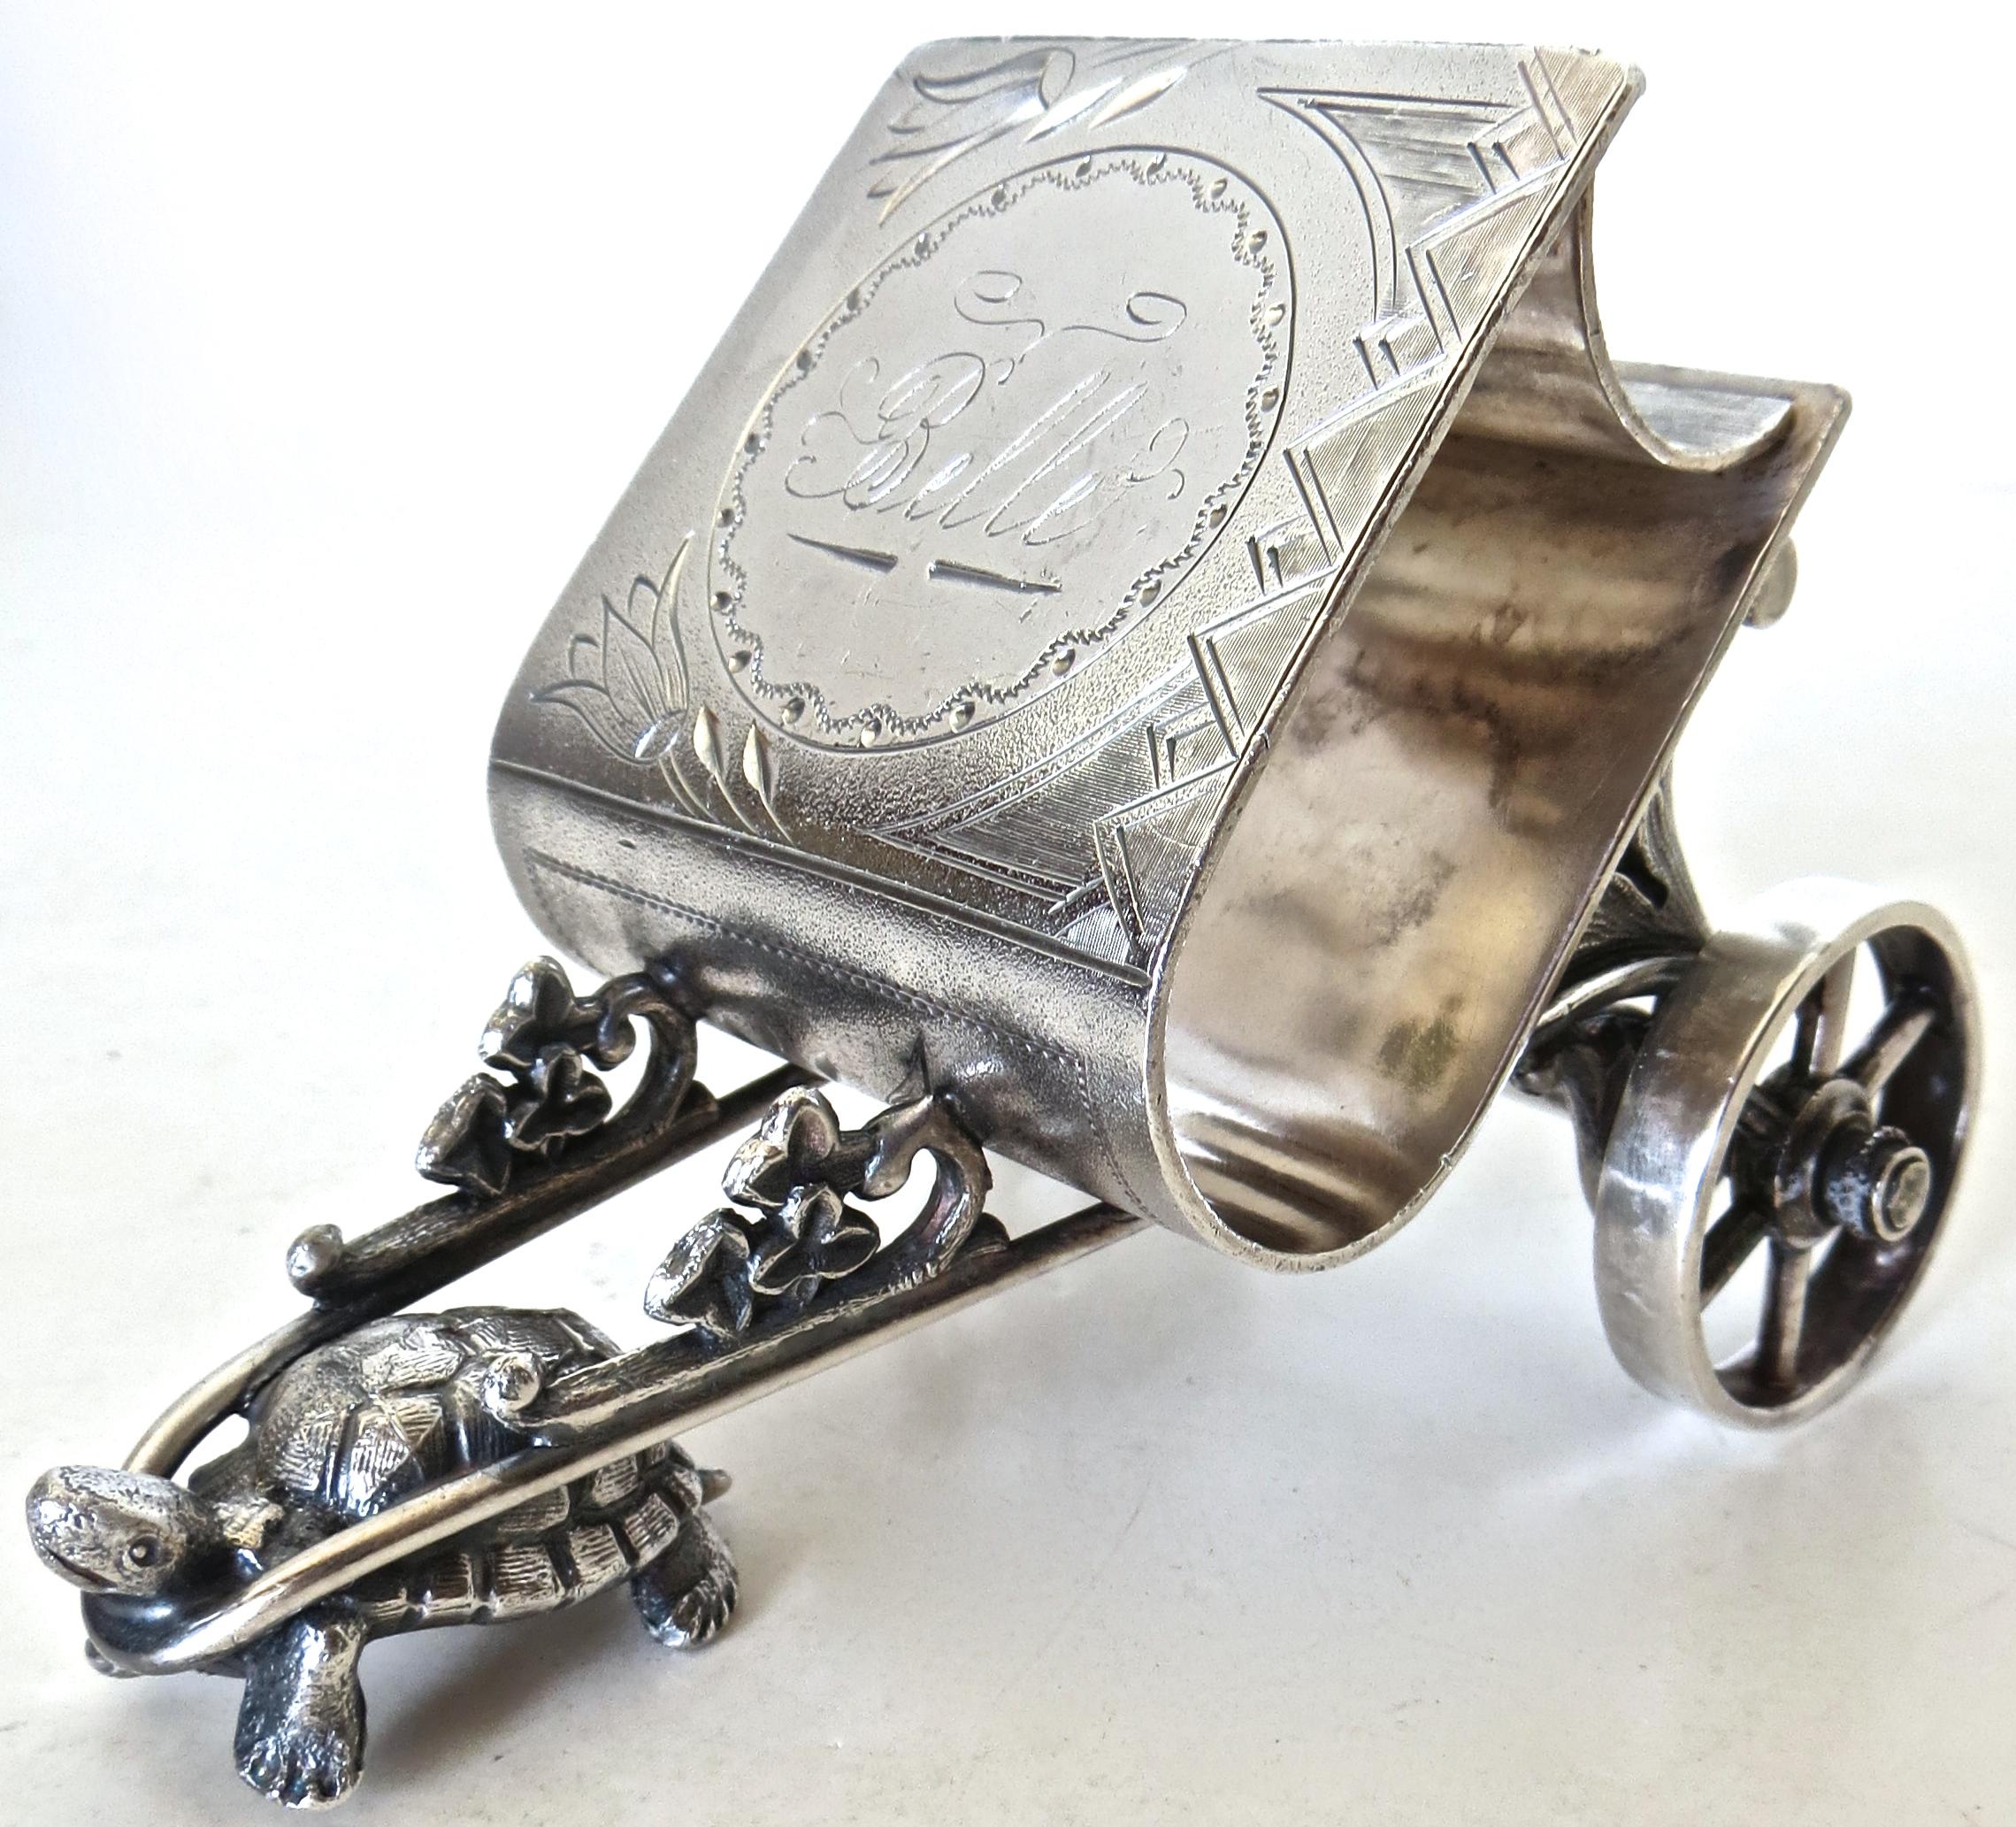 This is a very rare American silver plated Victorian figural napkin ring; attaining the status of A+ (rarest; only a few examples known) in Sandra Whitson's study, 